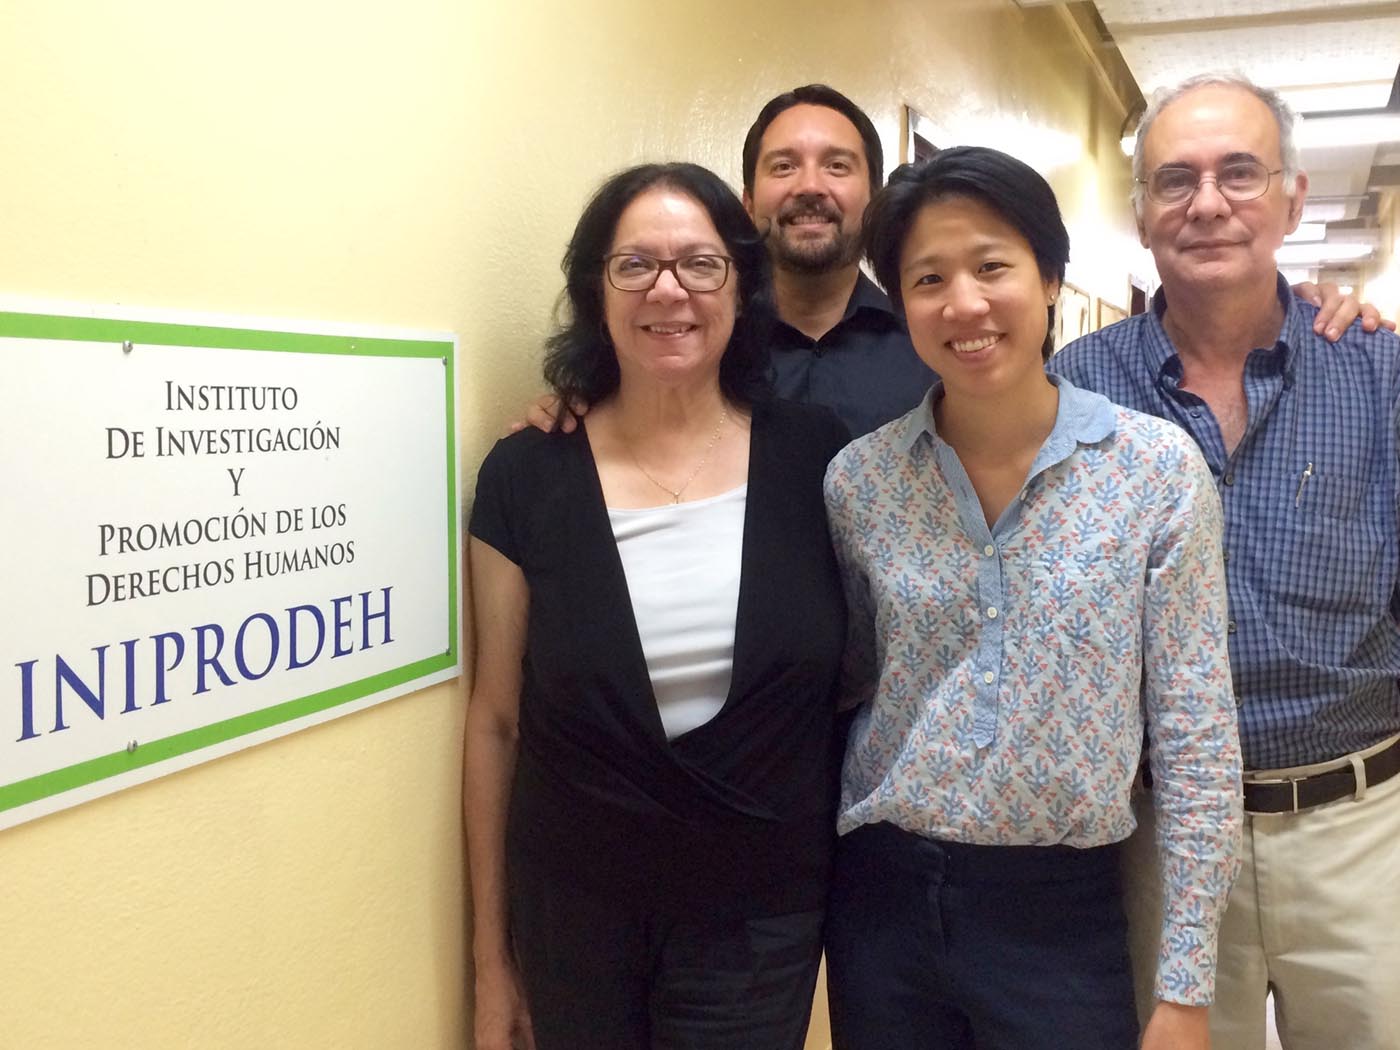 IHRC student Cindy Chu and IHRC director Francisco Rivera with clients Lina Torres and Manuel Torres